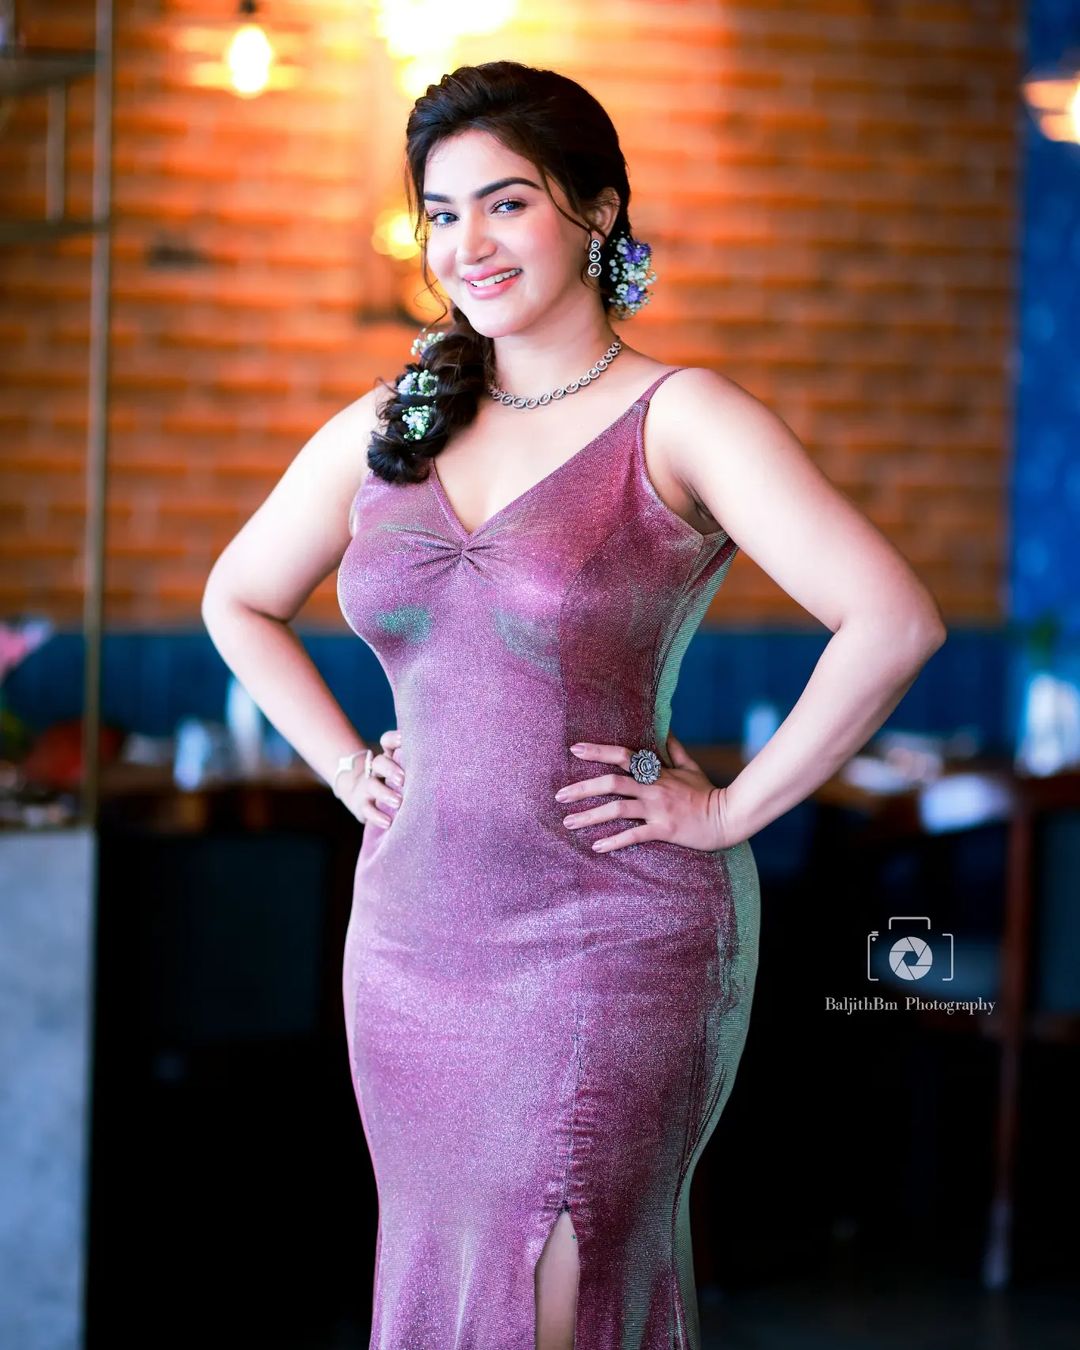 Honey Rose Looking Gorgeous in Shiny Dress